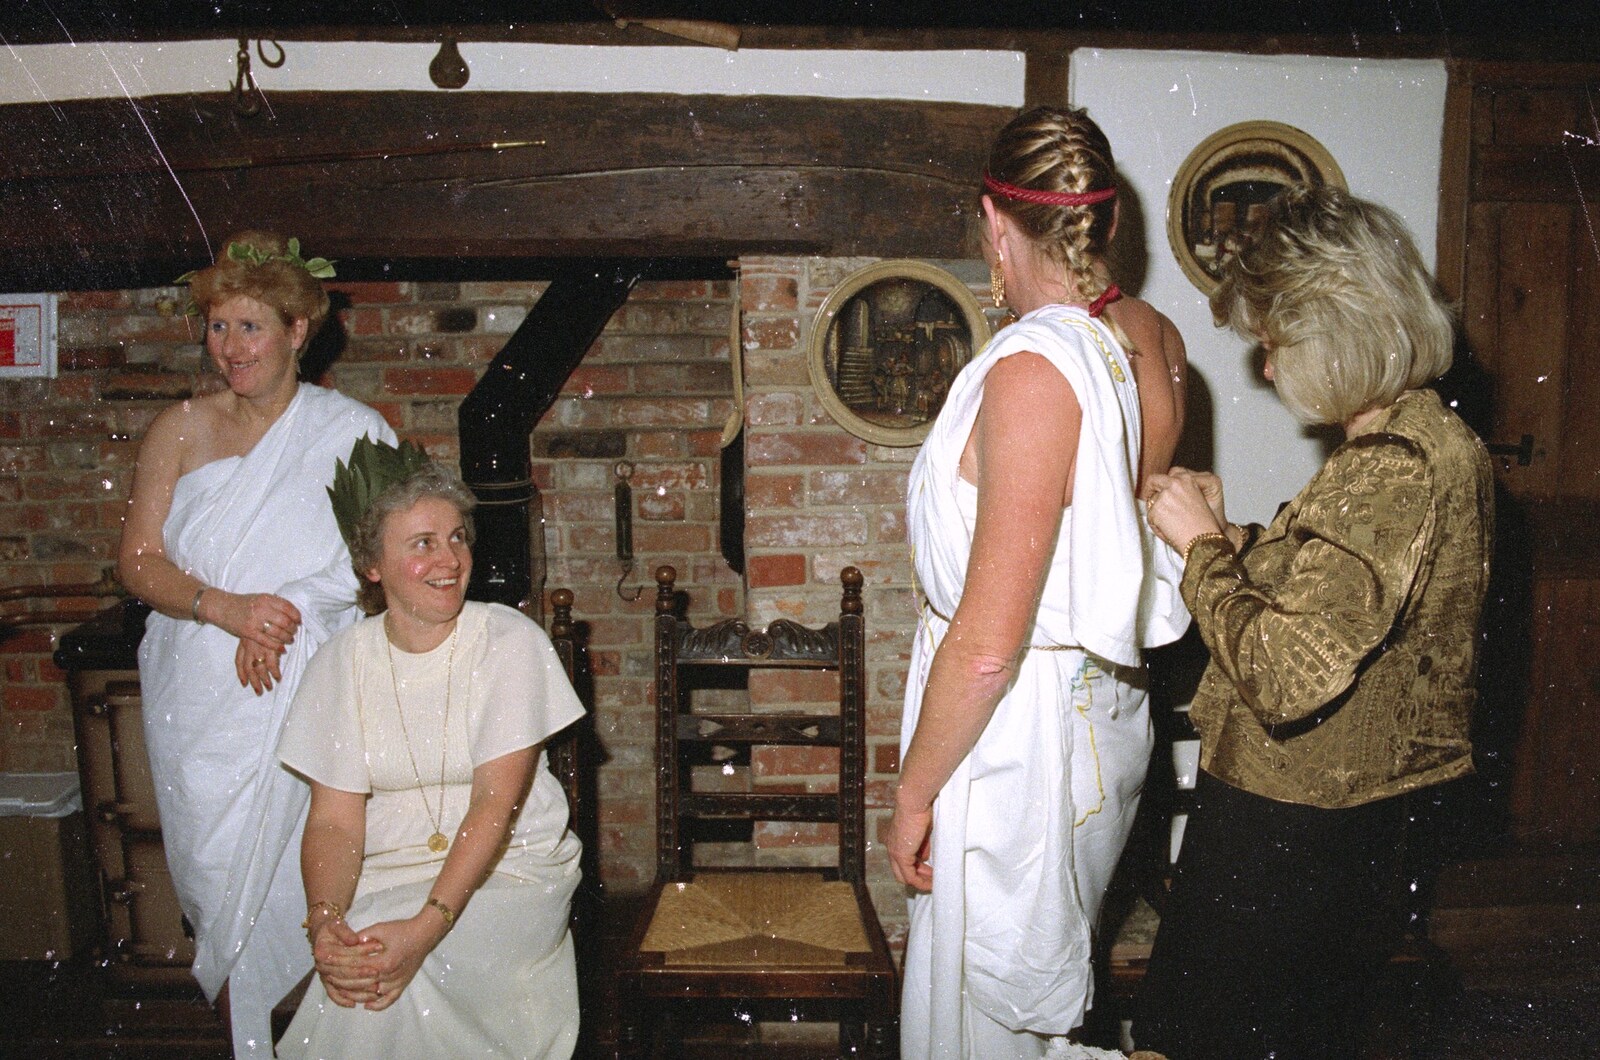 Sue gets more toga adjustment from Geoff and Brenda's Pre-Christmas Toga Party, Stuston, Suffolk - 17th December 1991